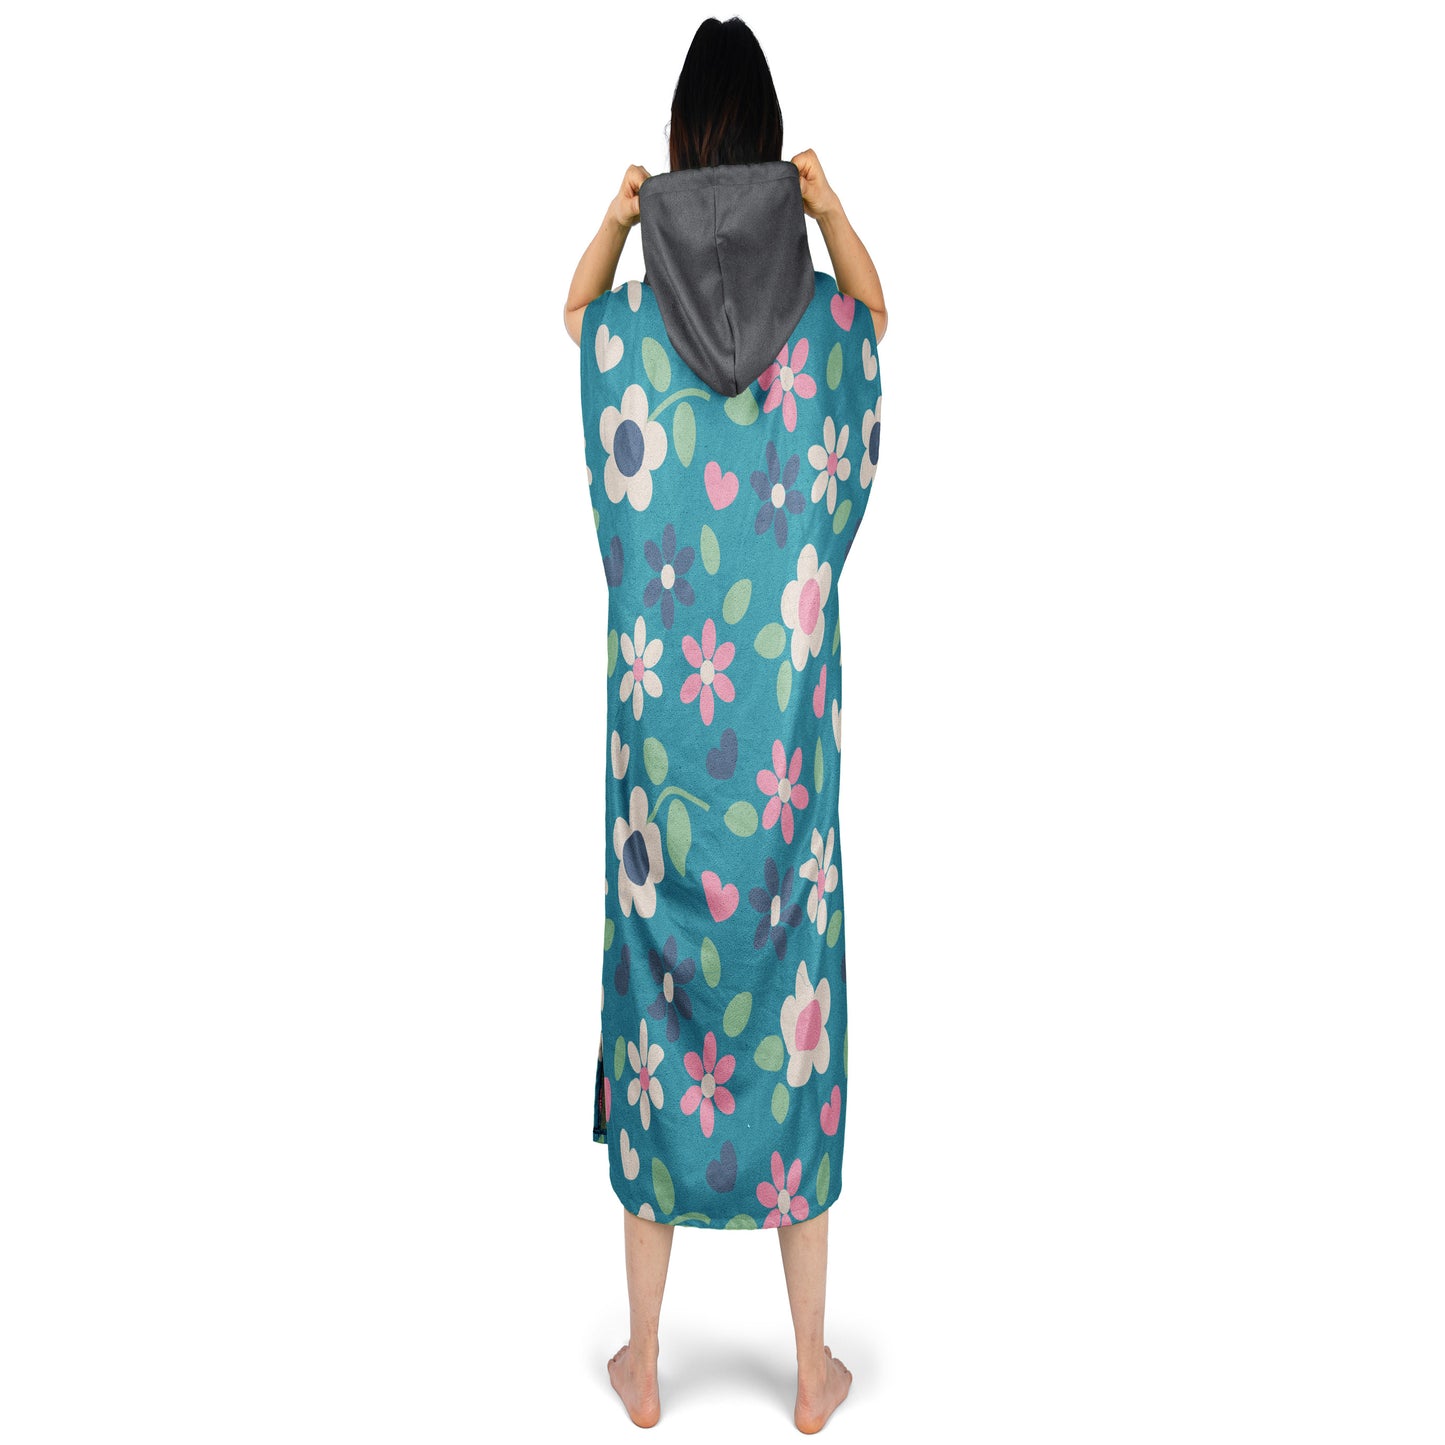 Stylish Womens Hooded Towel for Travel